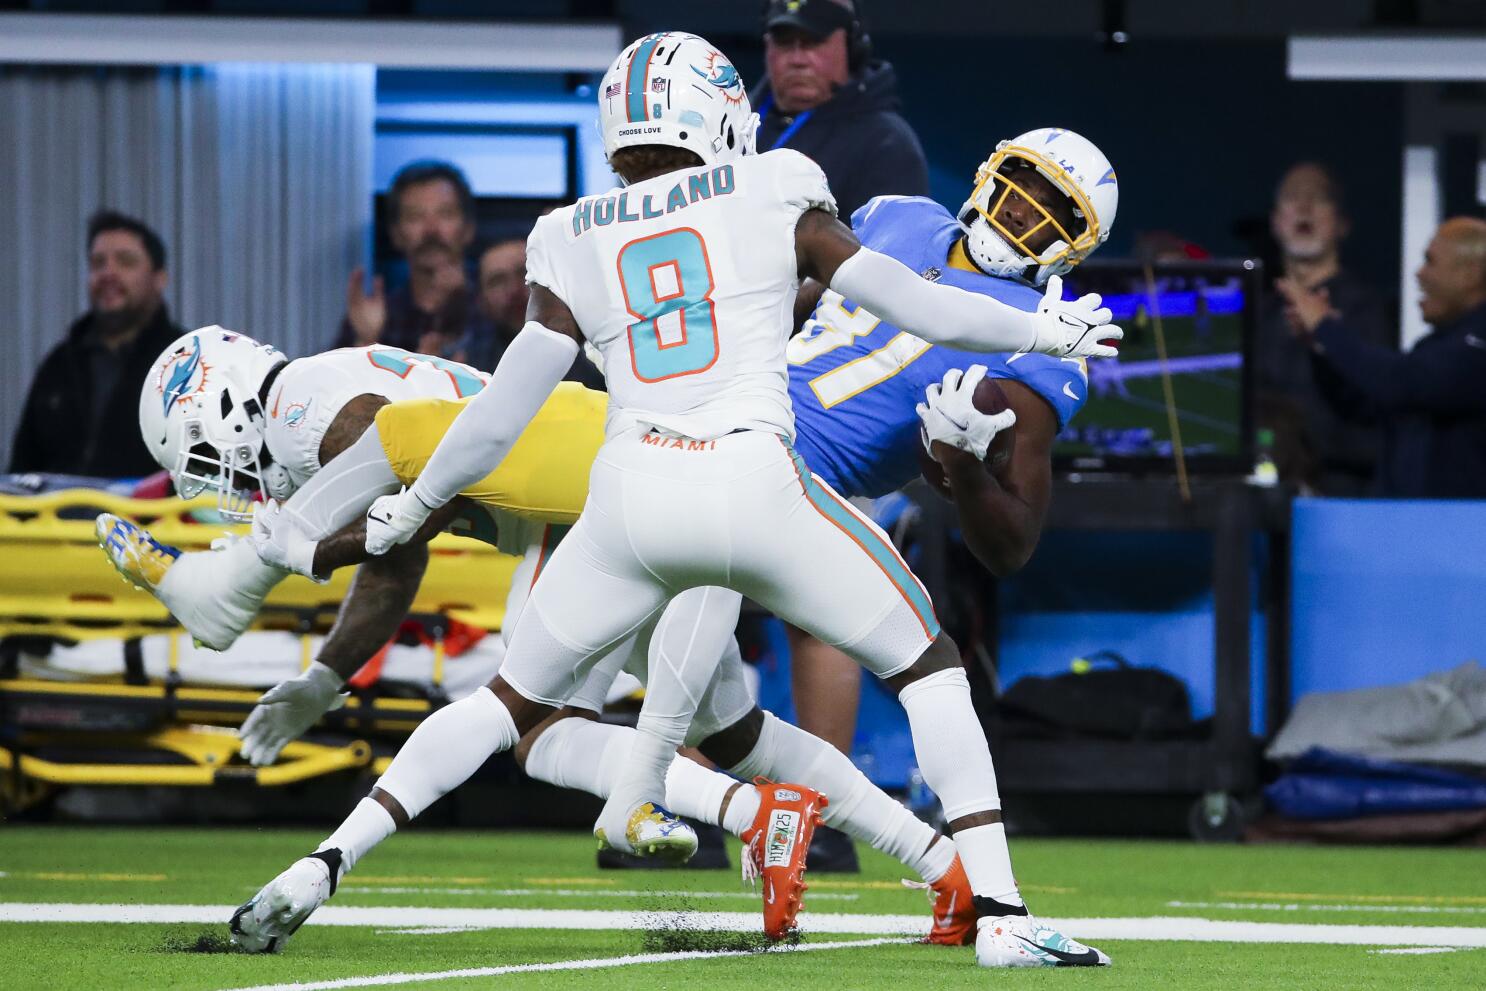 5 Takeaways: Chargers-Dolphins Week 1